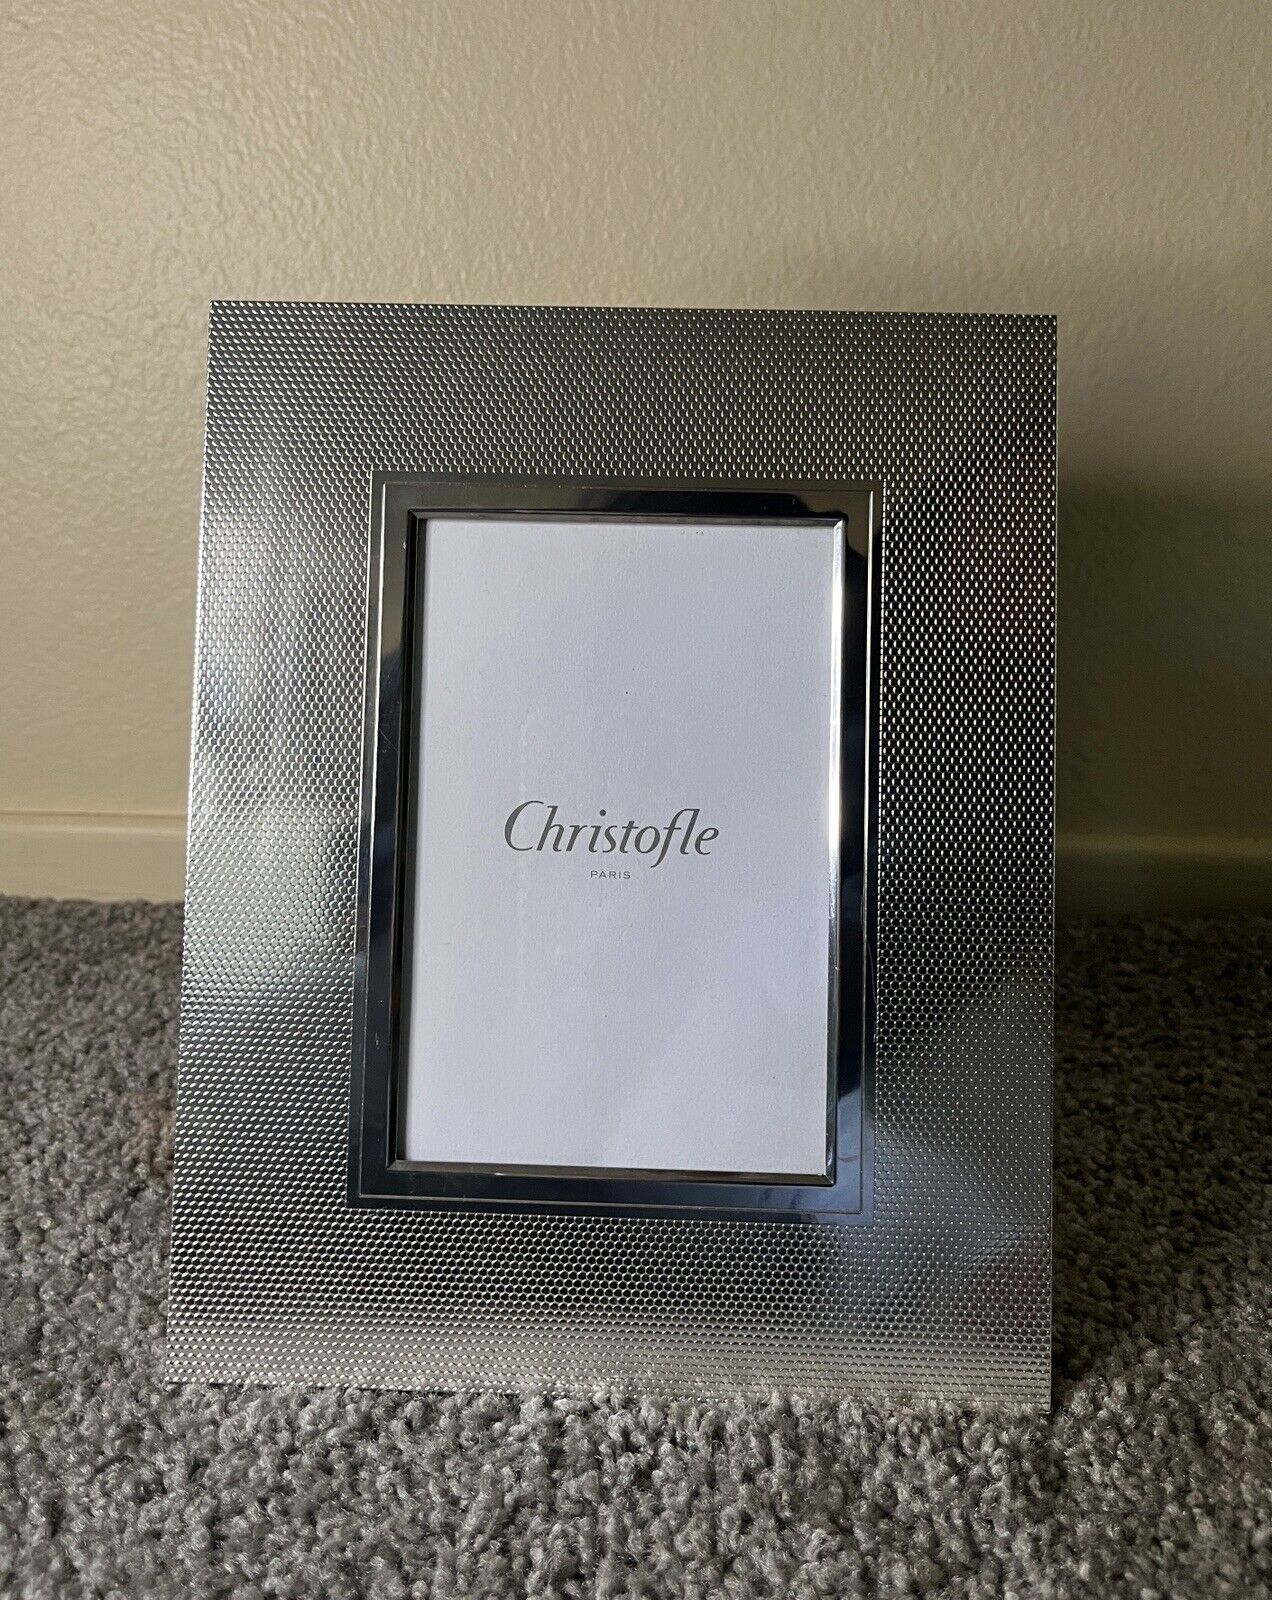 Christofle Paris Honeycomb Texture Mirrored Effect Silver Picture Frame 4”x6”